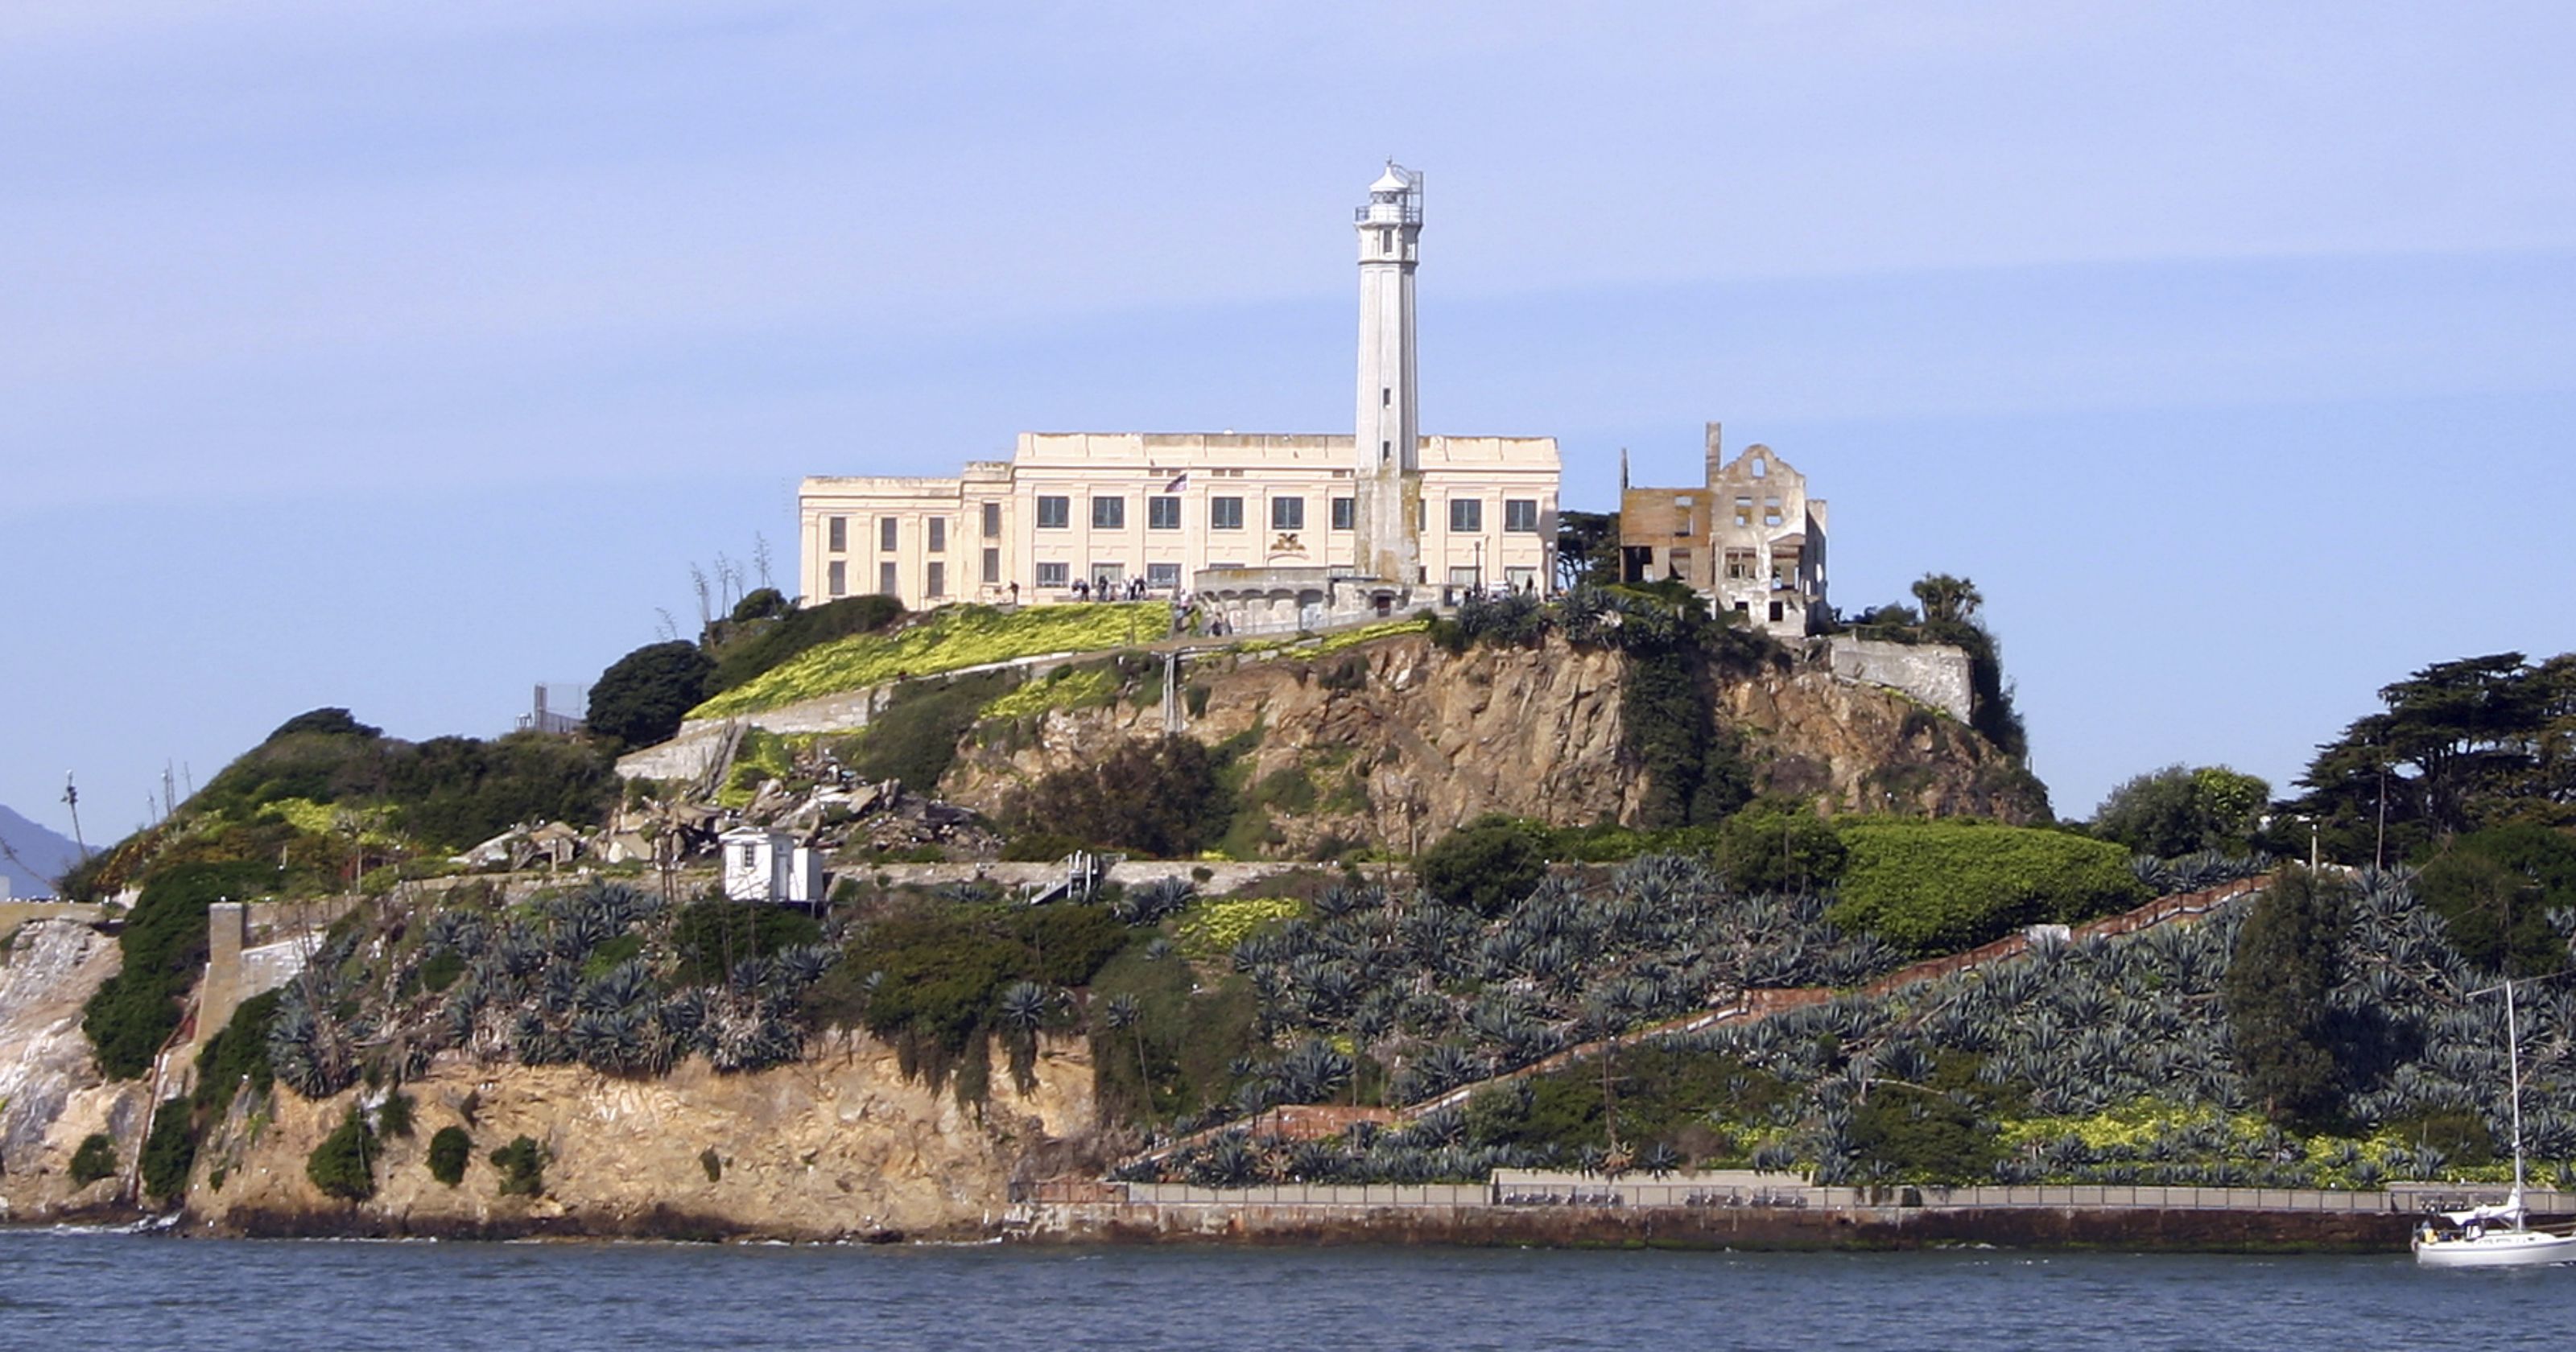 Escape from Alcatraz: Letter claiming inmates survived 'inconclusive'